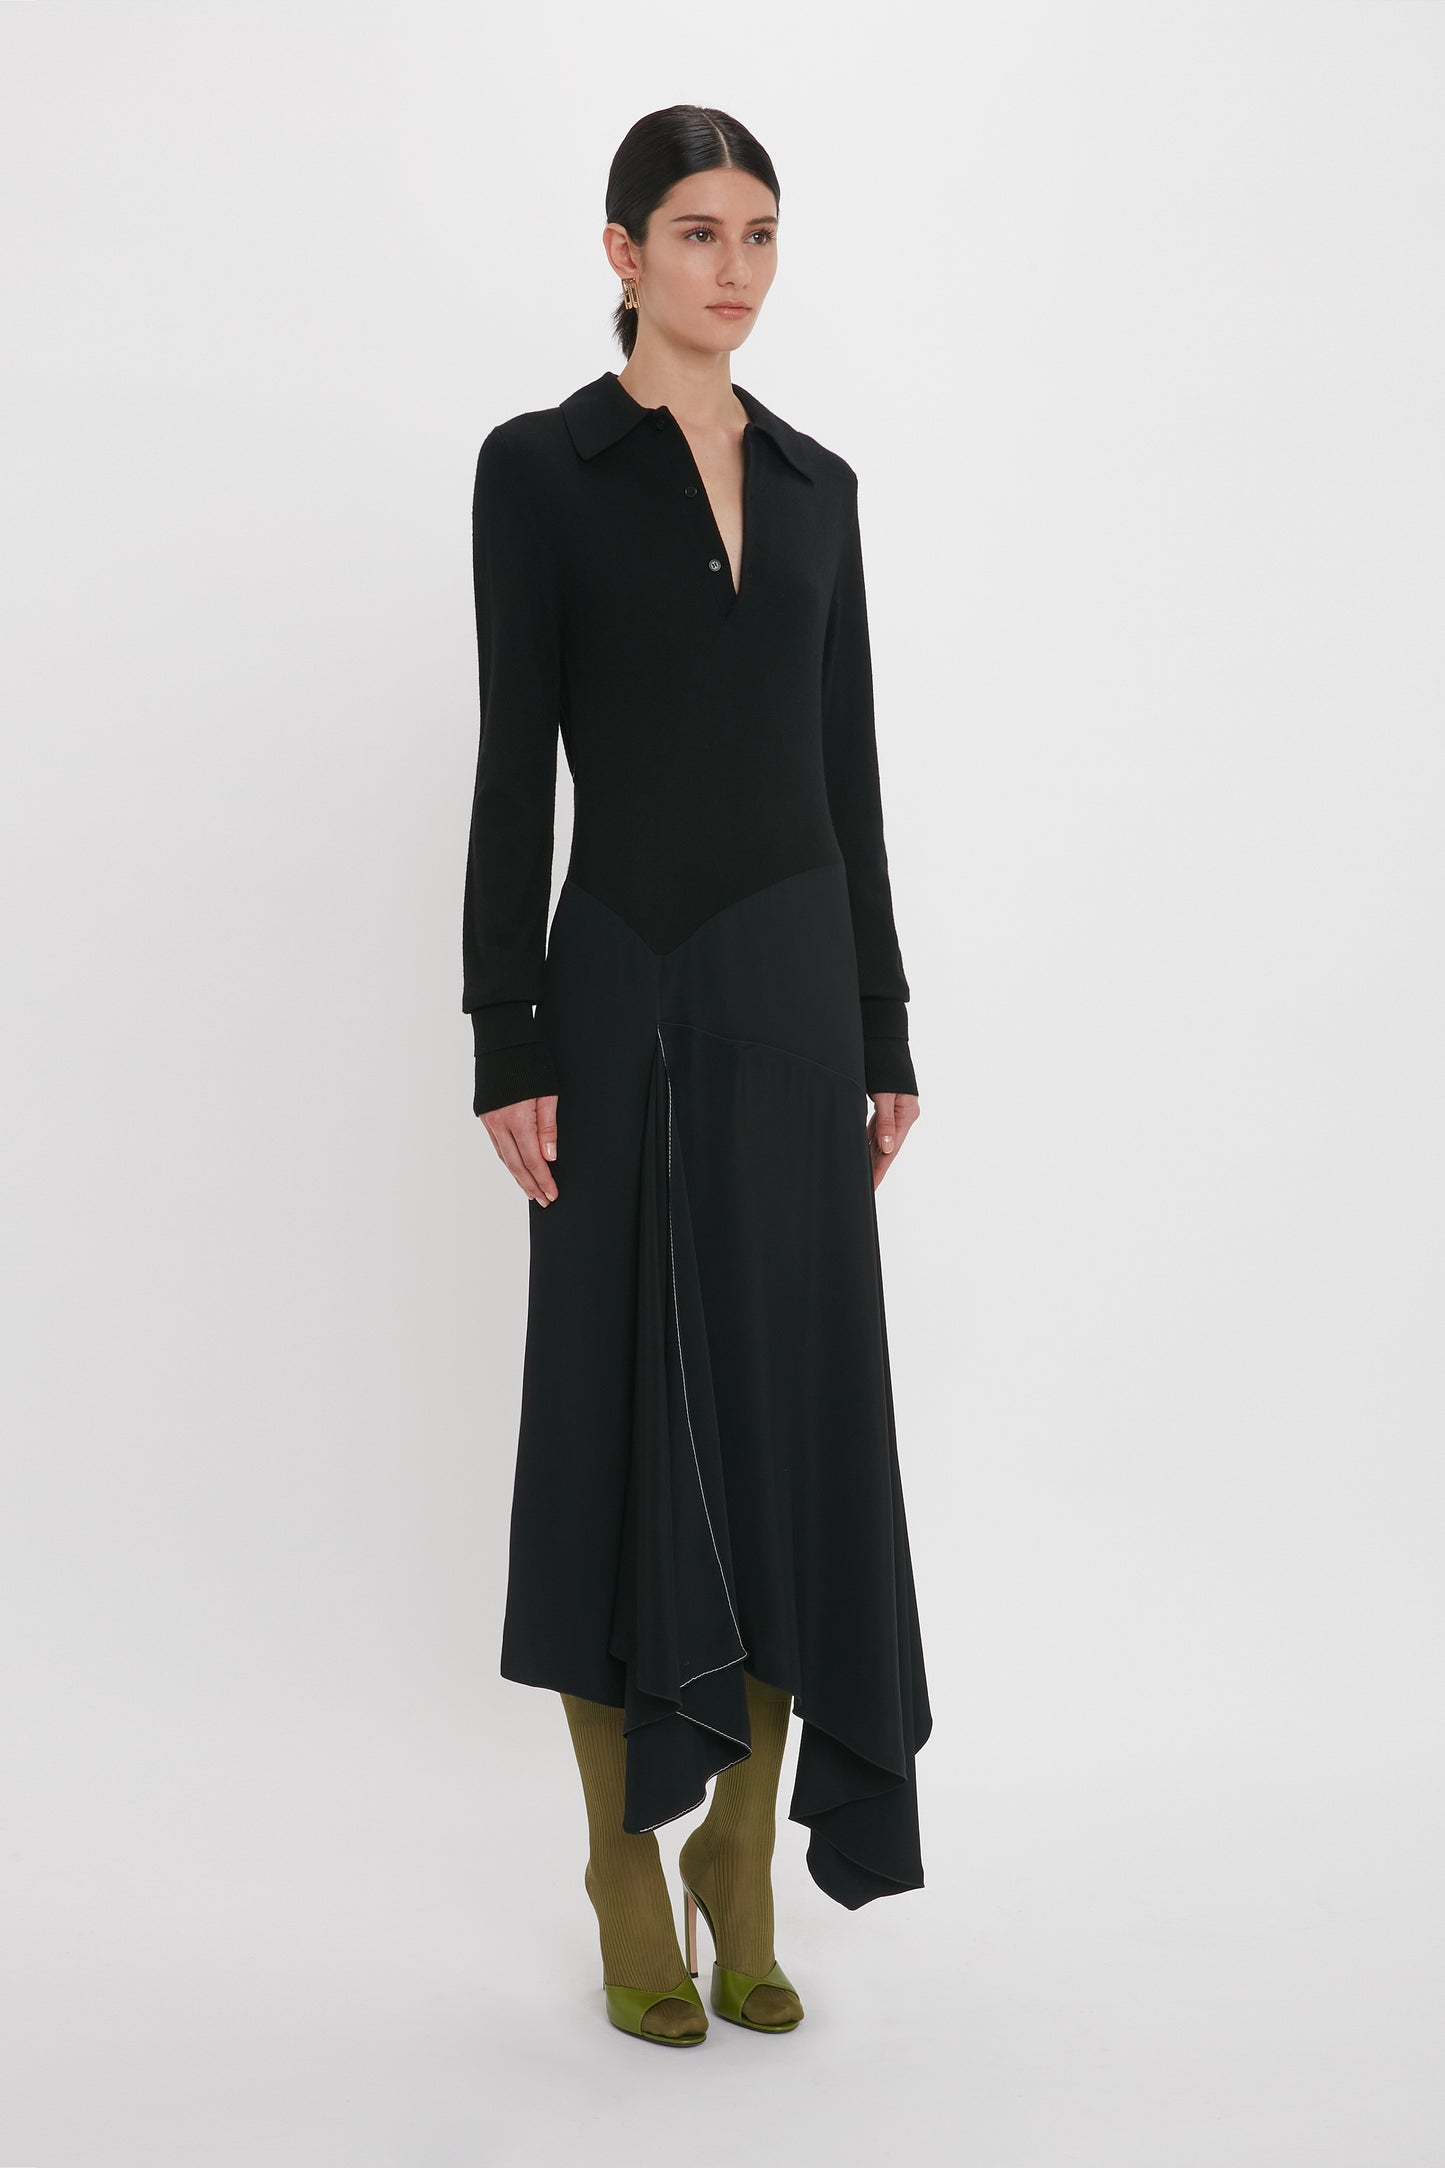 A person with dark hair is wearing a long-sleeved, black Victoria Beckham Henley Shirt Dress In Black with a V-neck and an asymmetrical hem, paired with olive green knee-high boots.